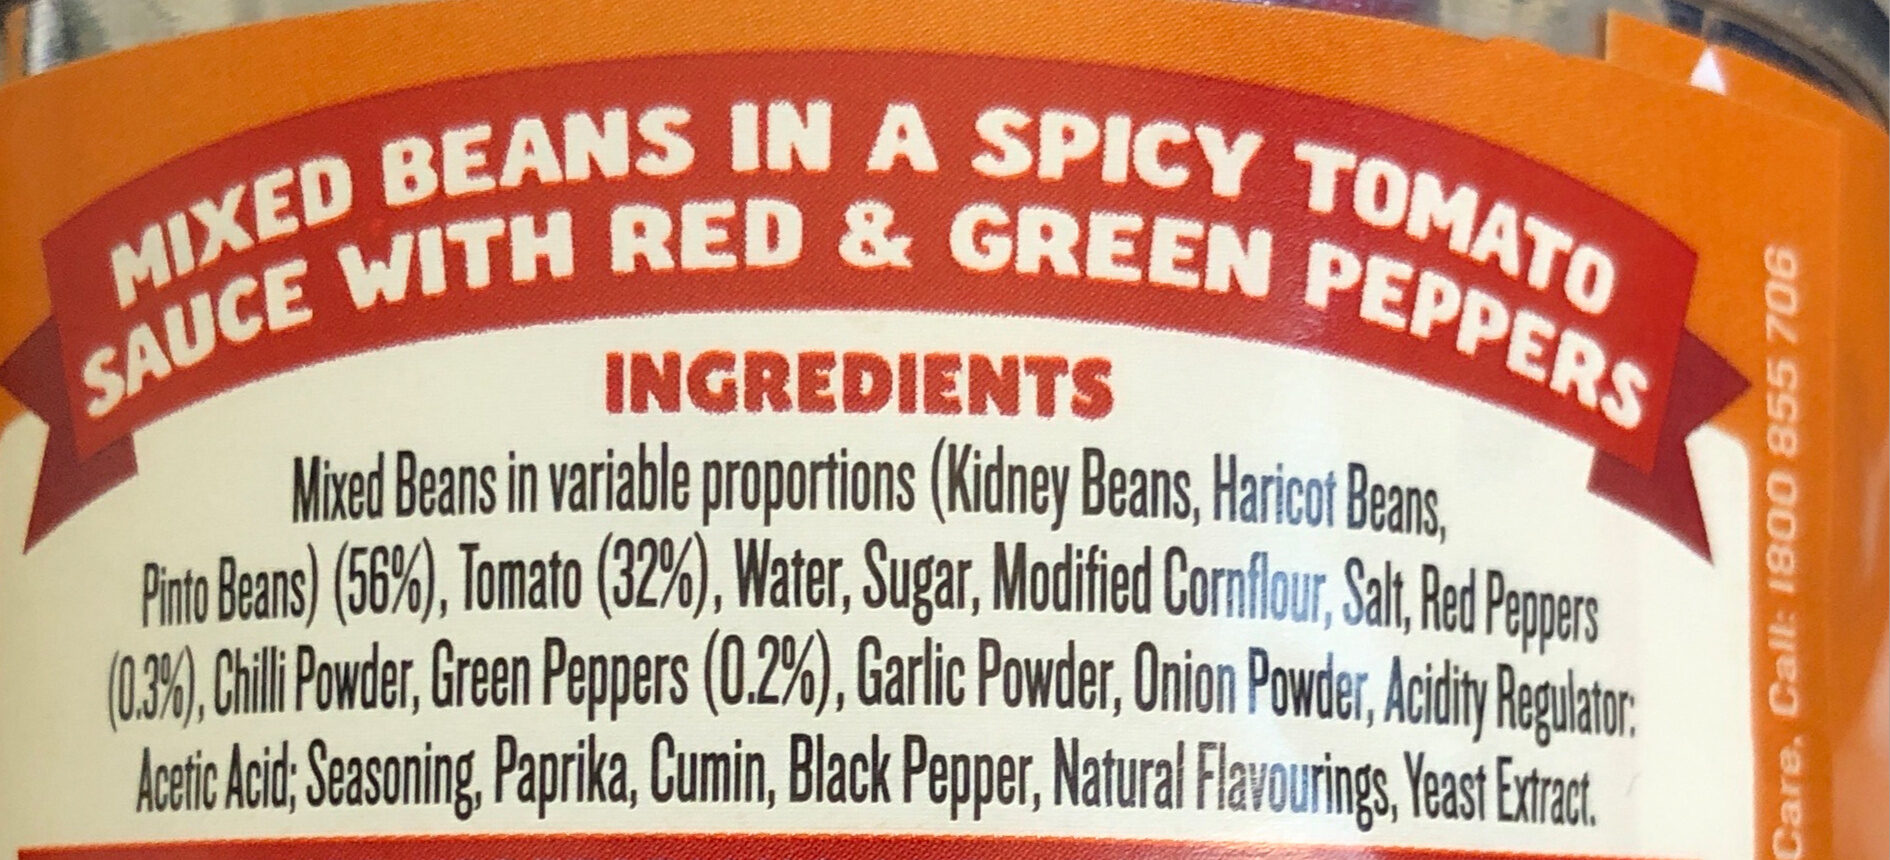 Taco mixed beans - Ingredients